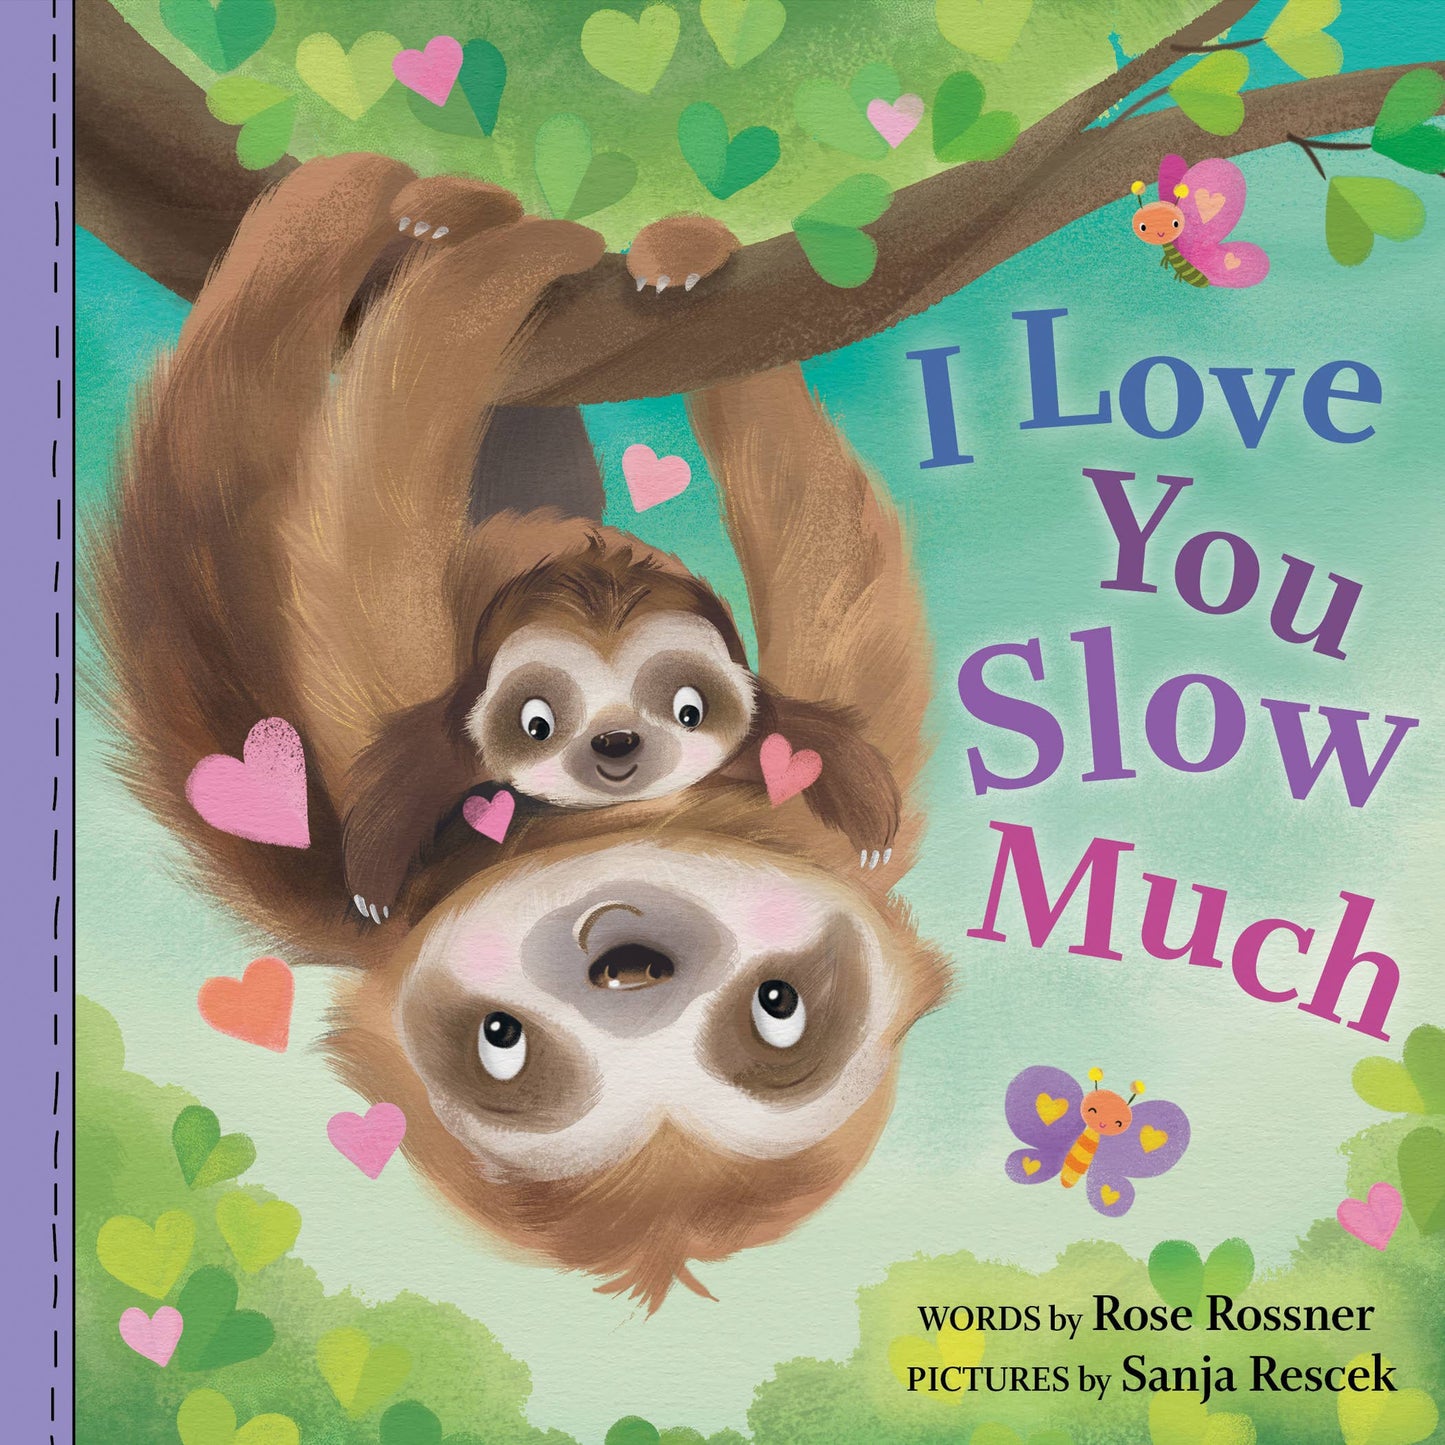 Sourcebooks - I Love You Slow Much (Board Book)